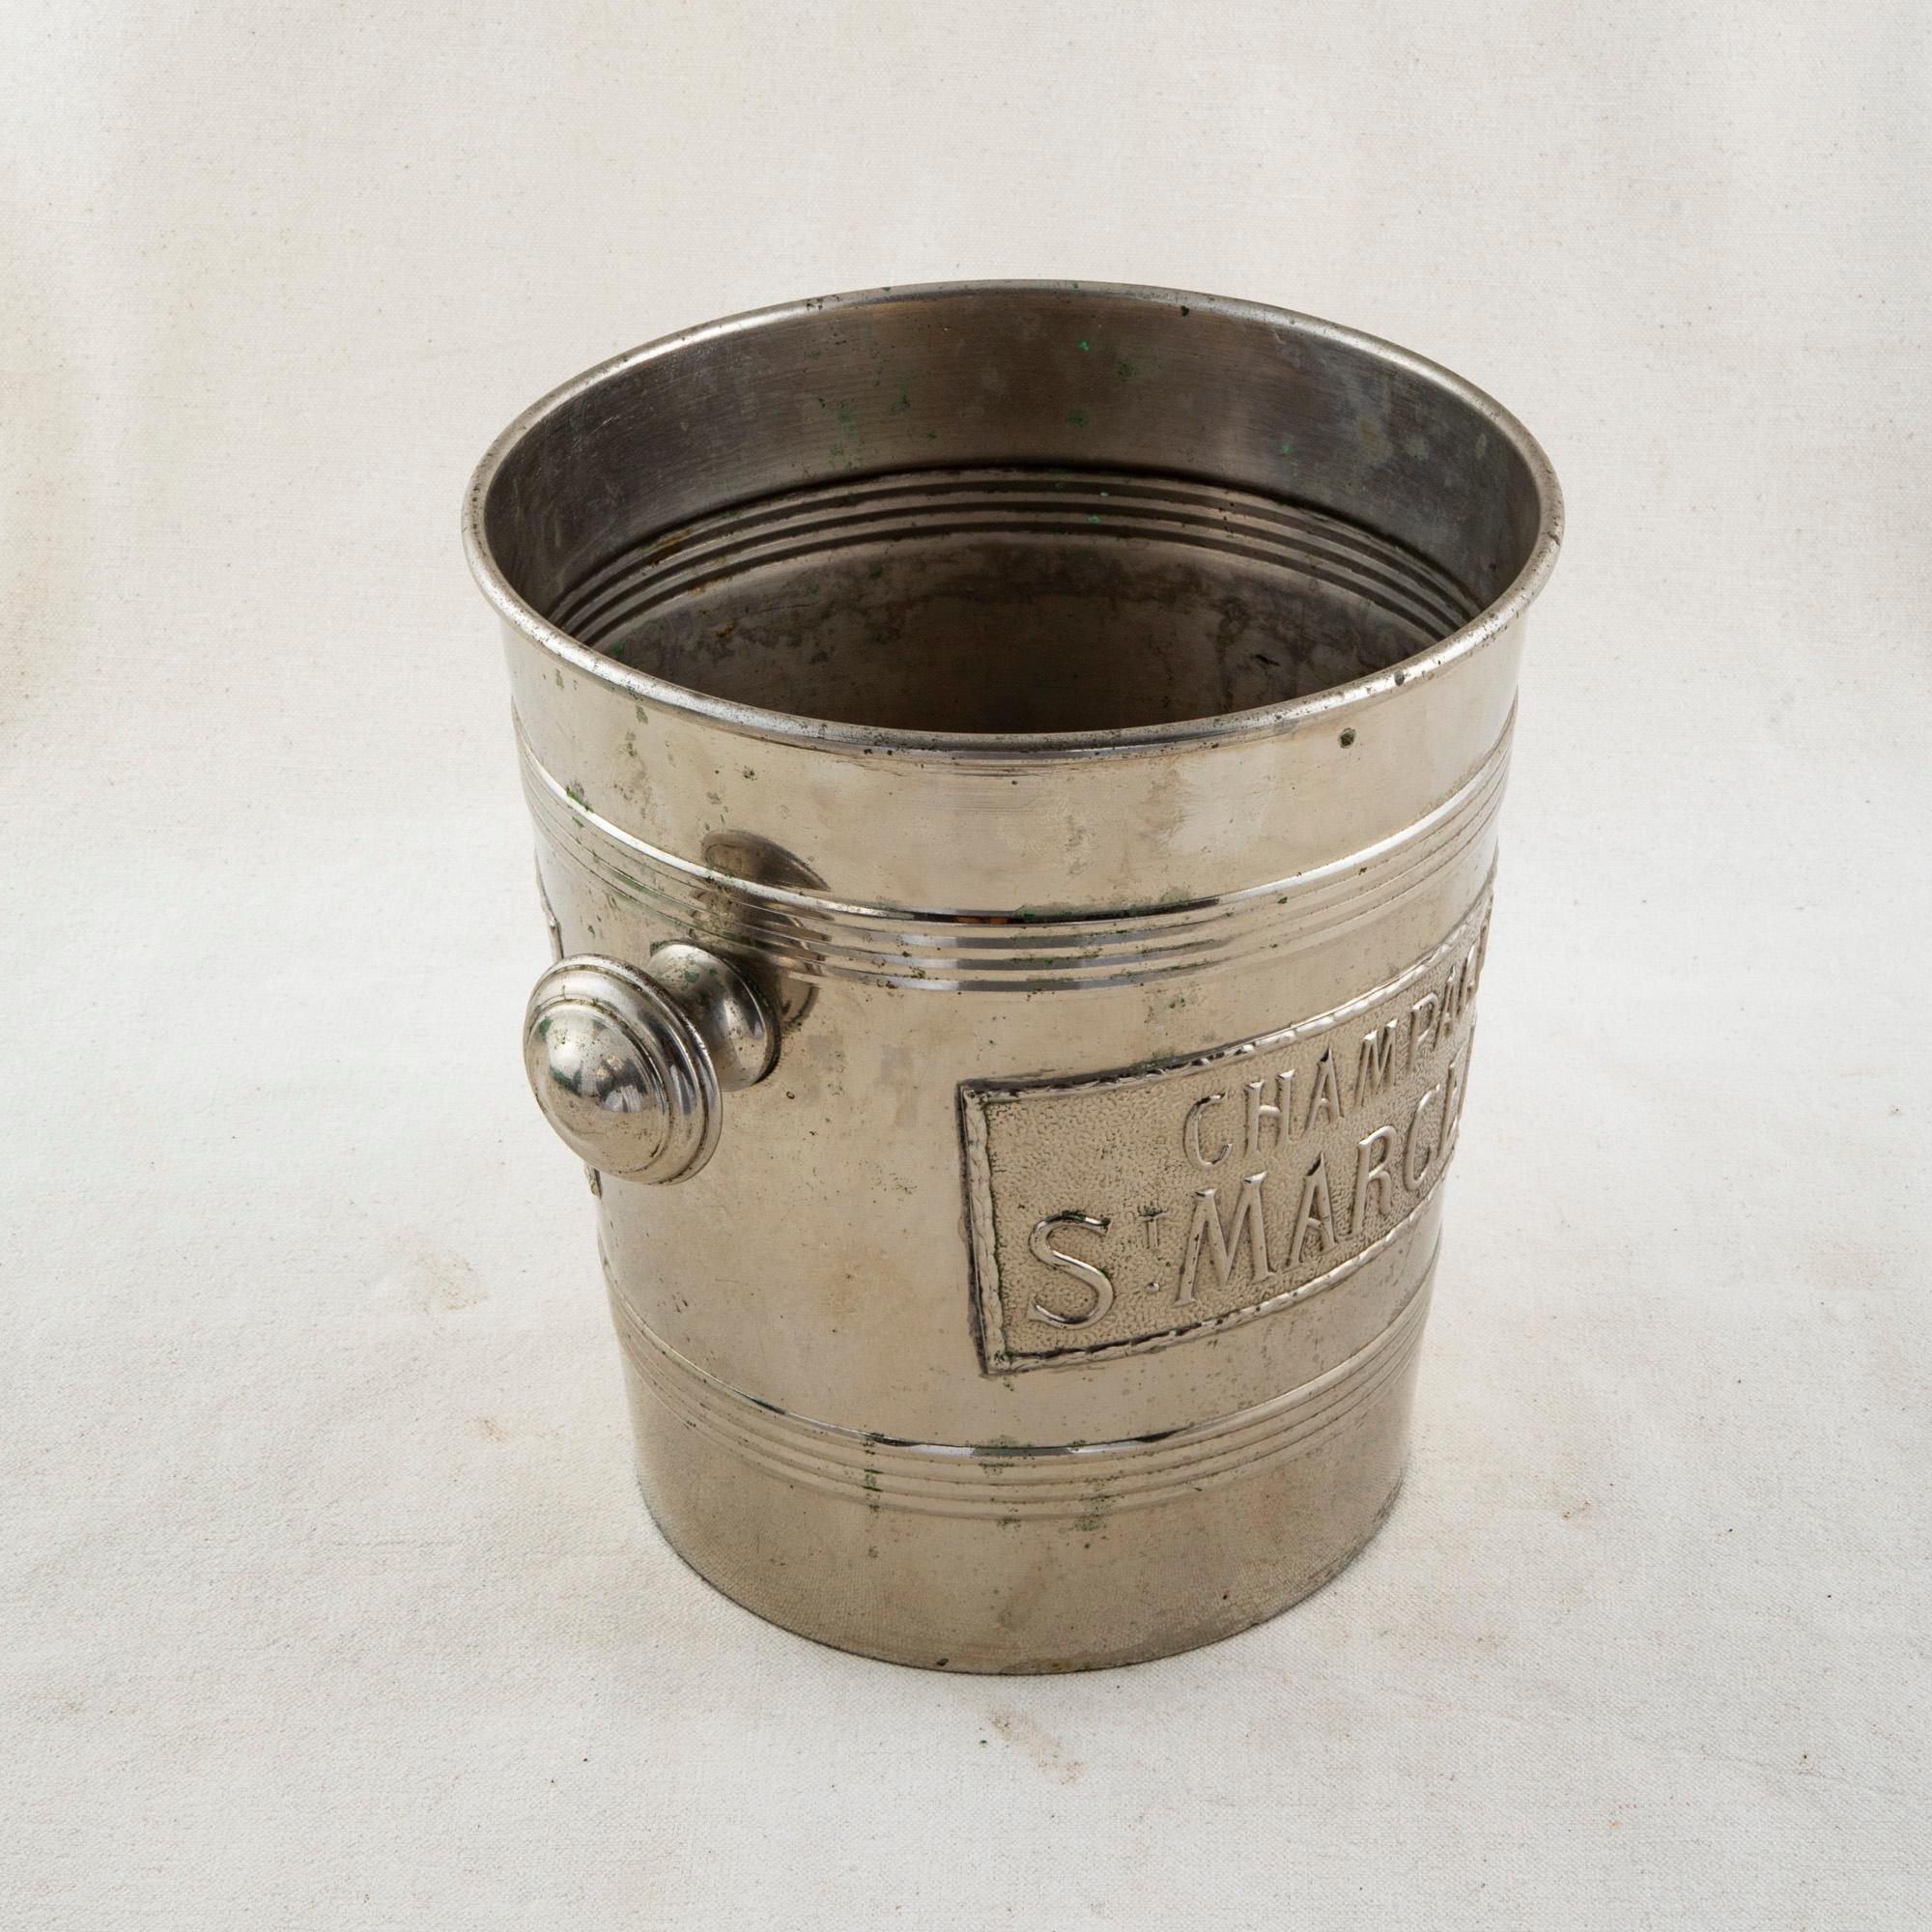 This French Art Deco Period silver plate champagne bucket from the early-twentieth century bears the name of the champagne producer St. Marceaux. A knob handle on each side allows for easy carrying. Stamped with the hallmark Unis France on the